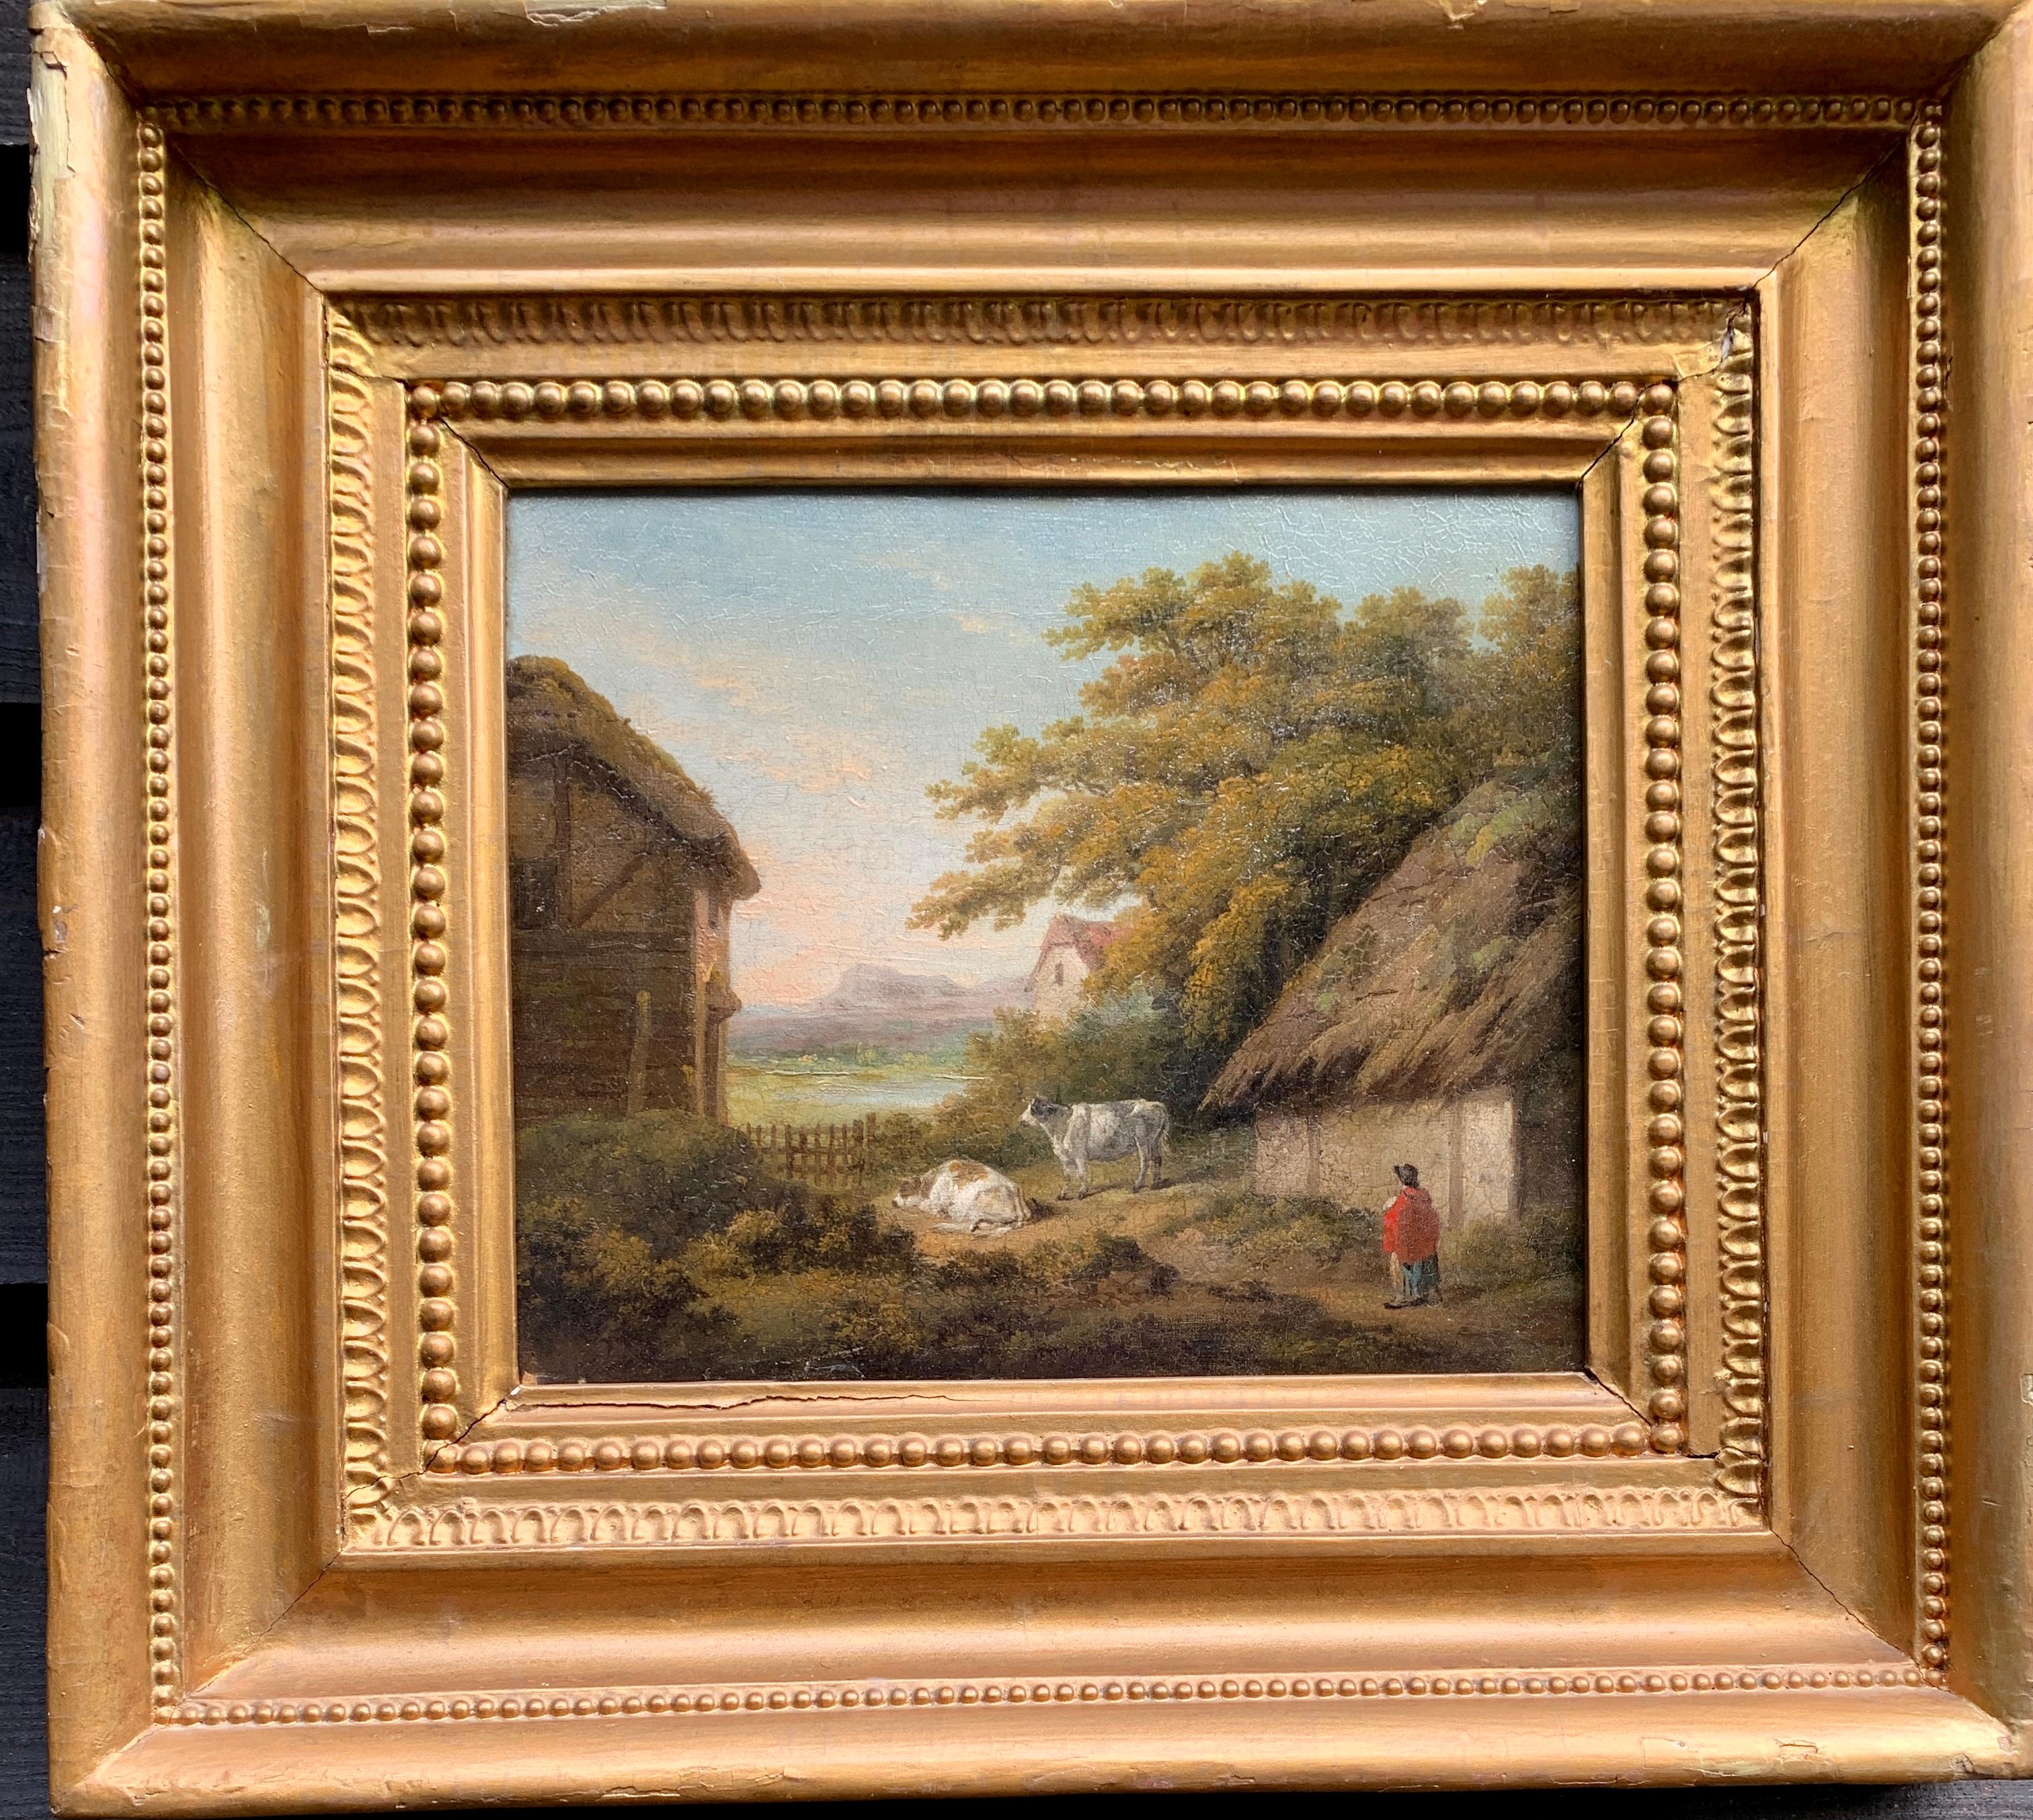 19th century Victorian English Antique landscape with cottage, figure and cows